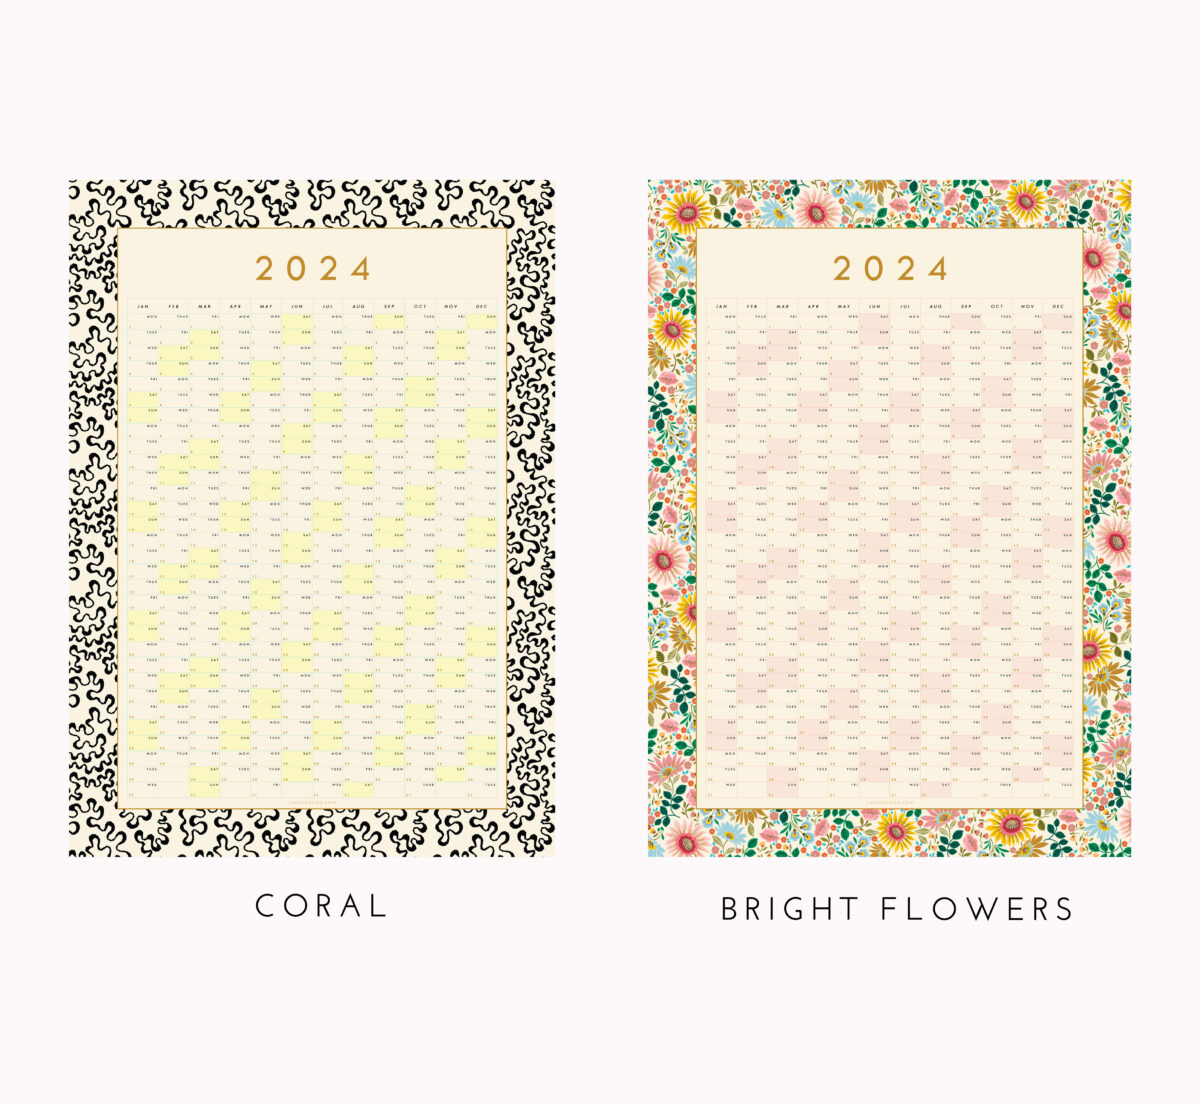 2024 wall planners both design bright flowers and coral pattern